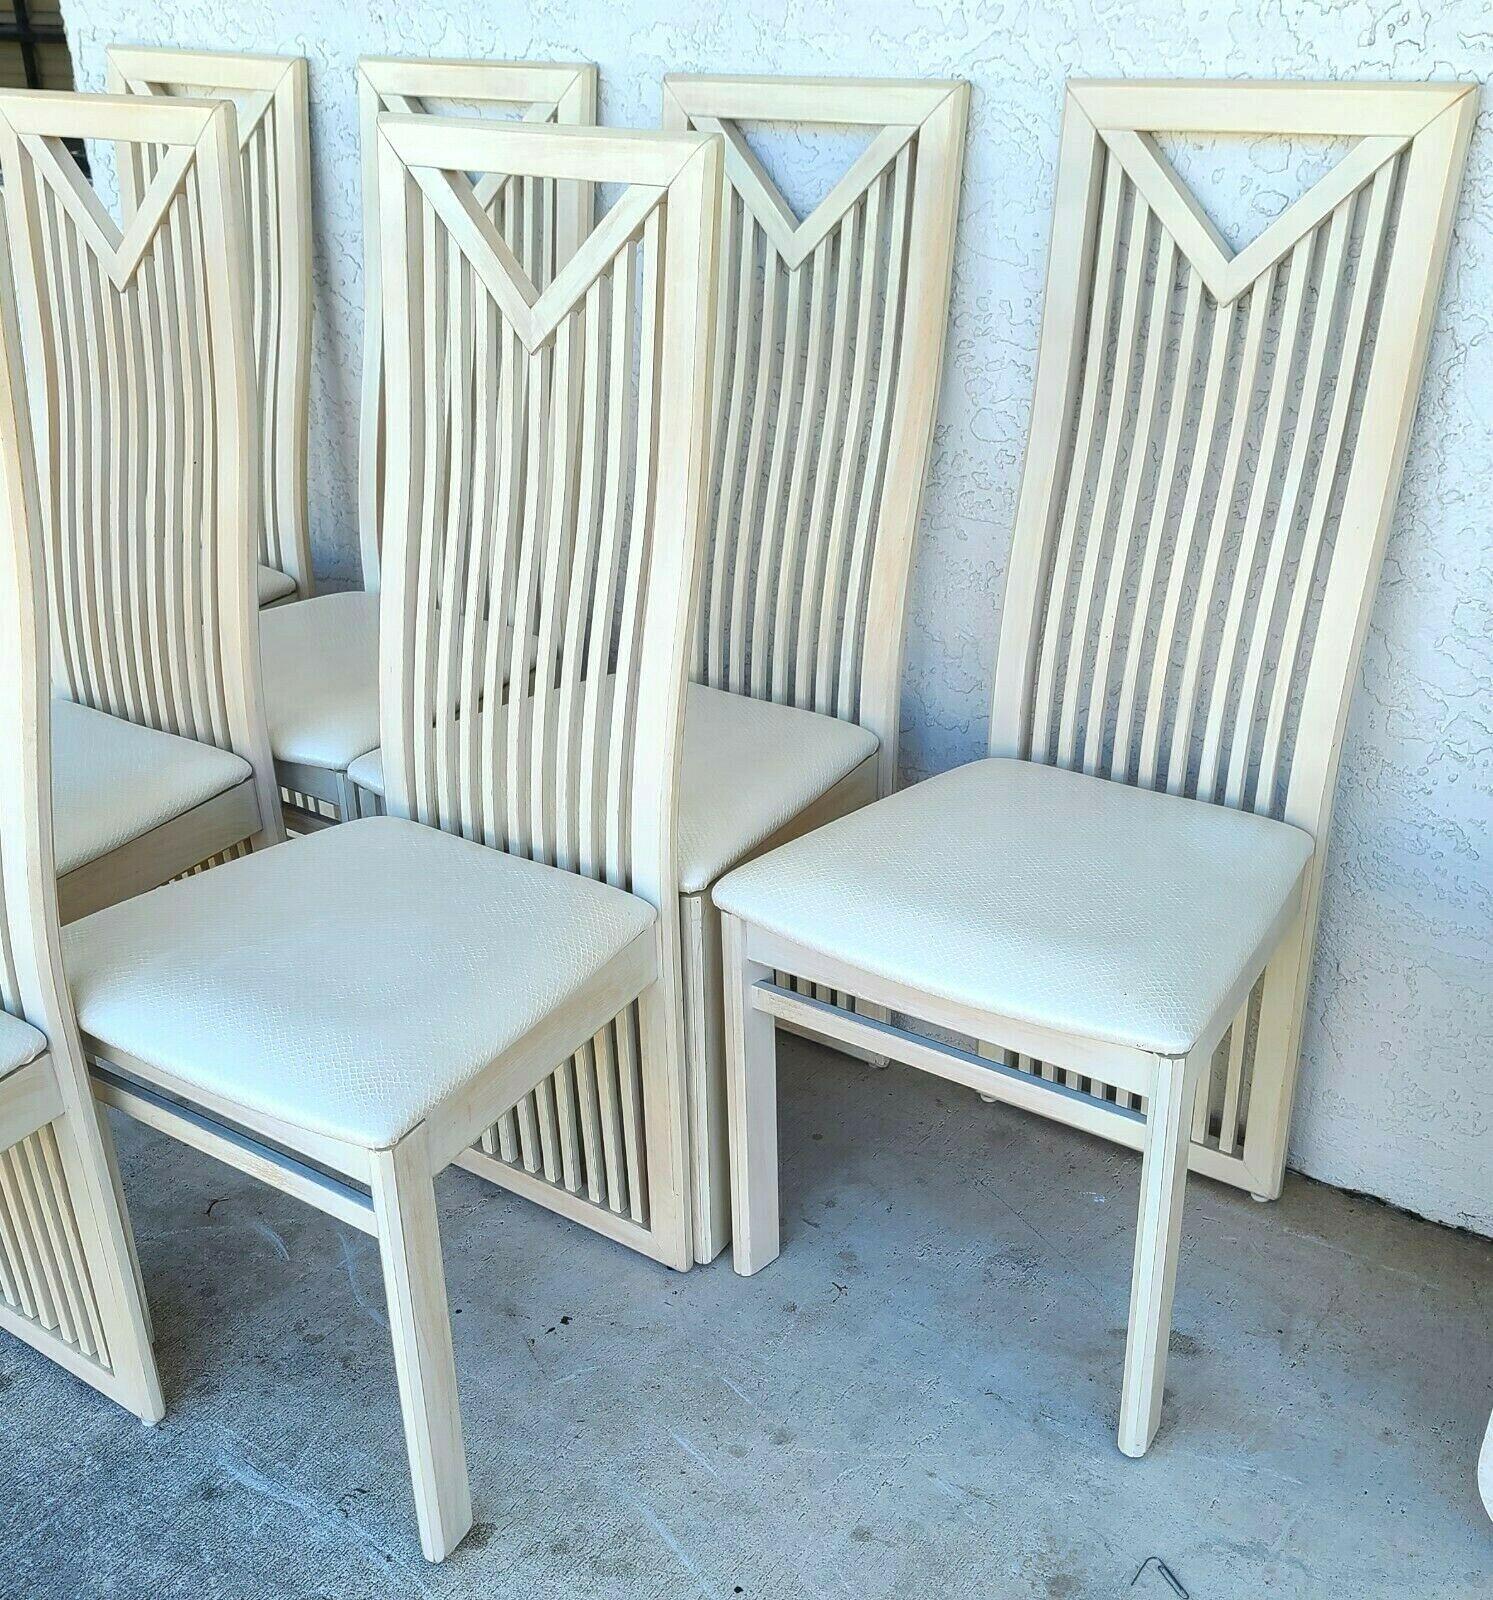 Offering One Of Our Recent Palm Beach Estate Fine Furniture Acquisitions Of A 
Set of 7 Italian Dining Chairs by S.p.A. TONON 
Featuring a light wood finish and embossed Vinyl seats that are stain-resistant.

Approximate Measurements in